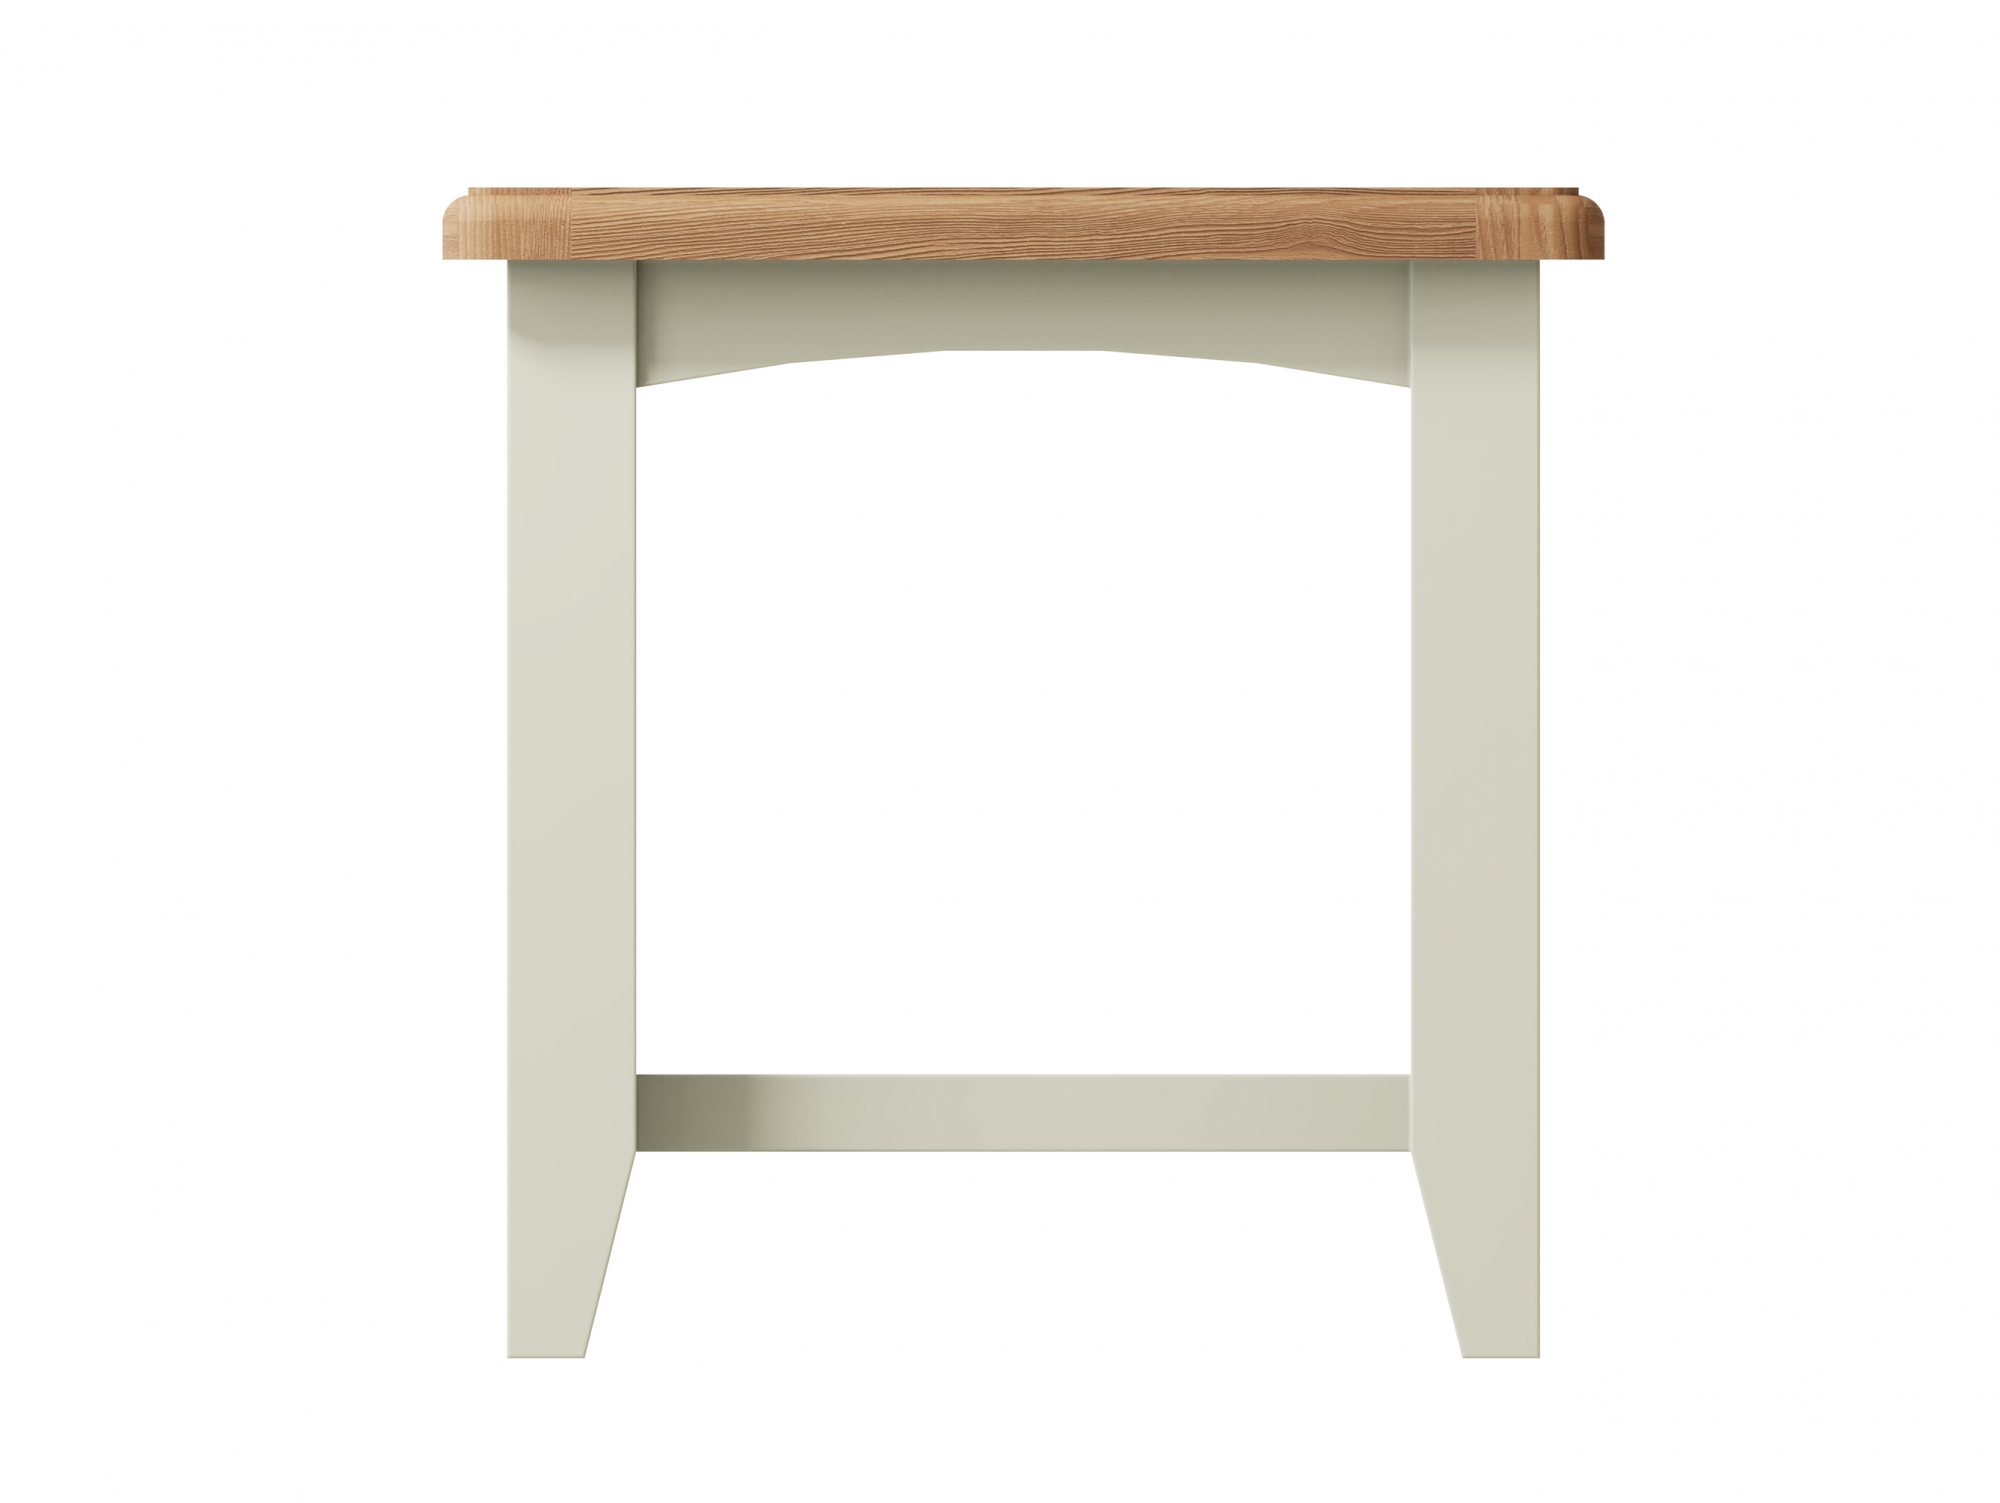 Kenmore Kenmore Patterdale White and Oak Coffee Table (Flat Packed)